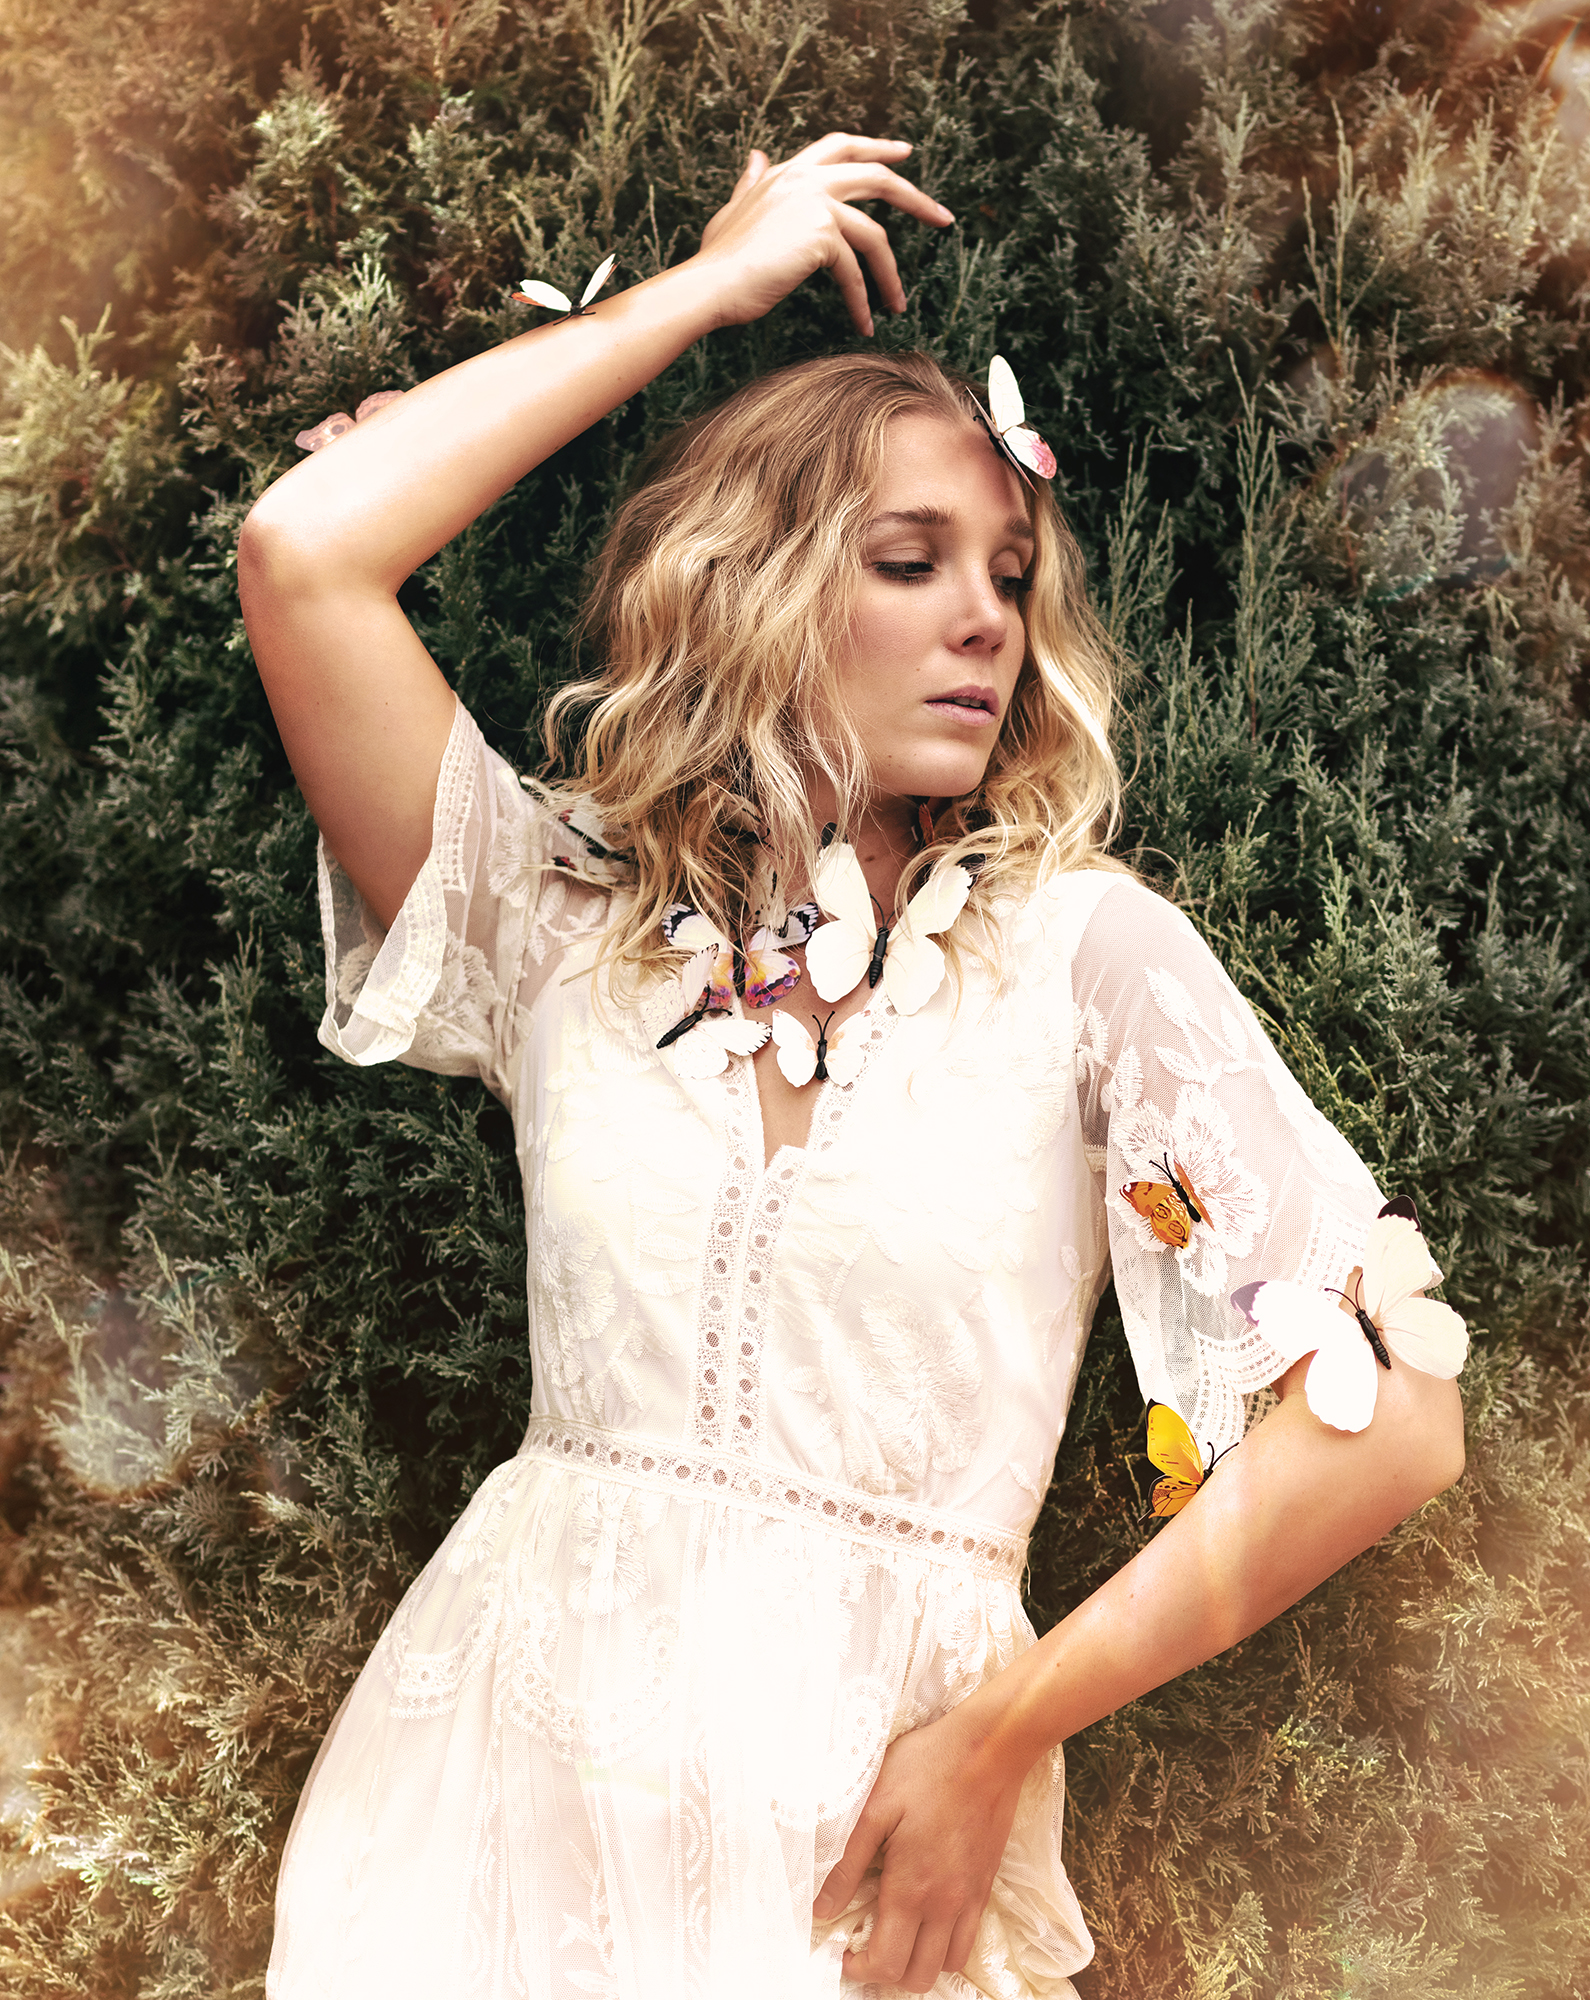 A person standing in front of a greenery background with fake butterflies stuck to their body, wearing a white dress with a lace collar and sleeves